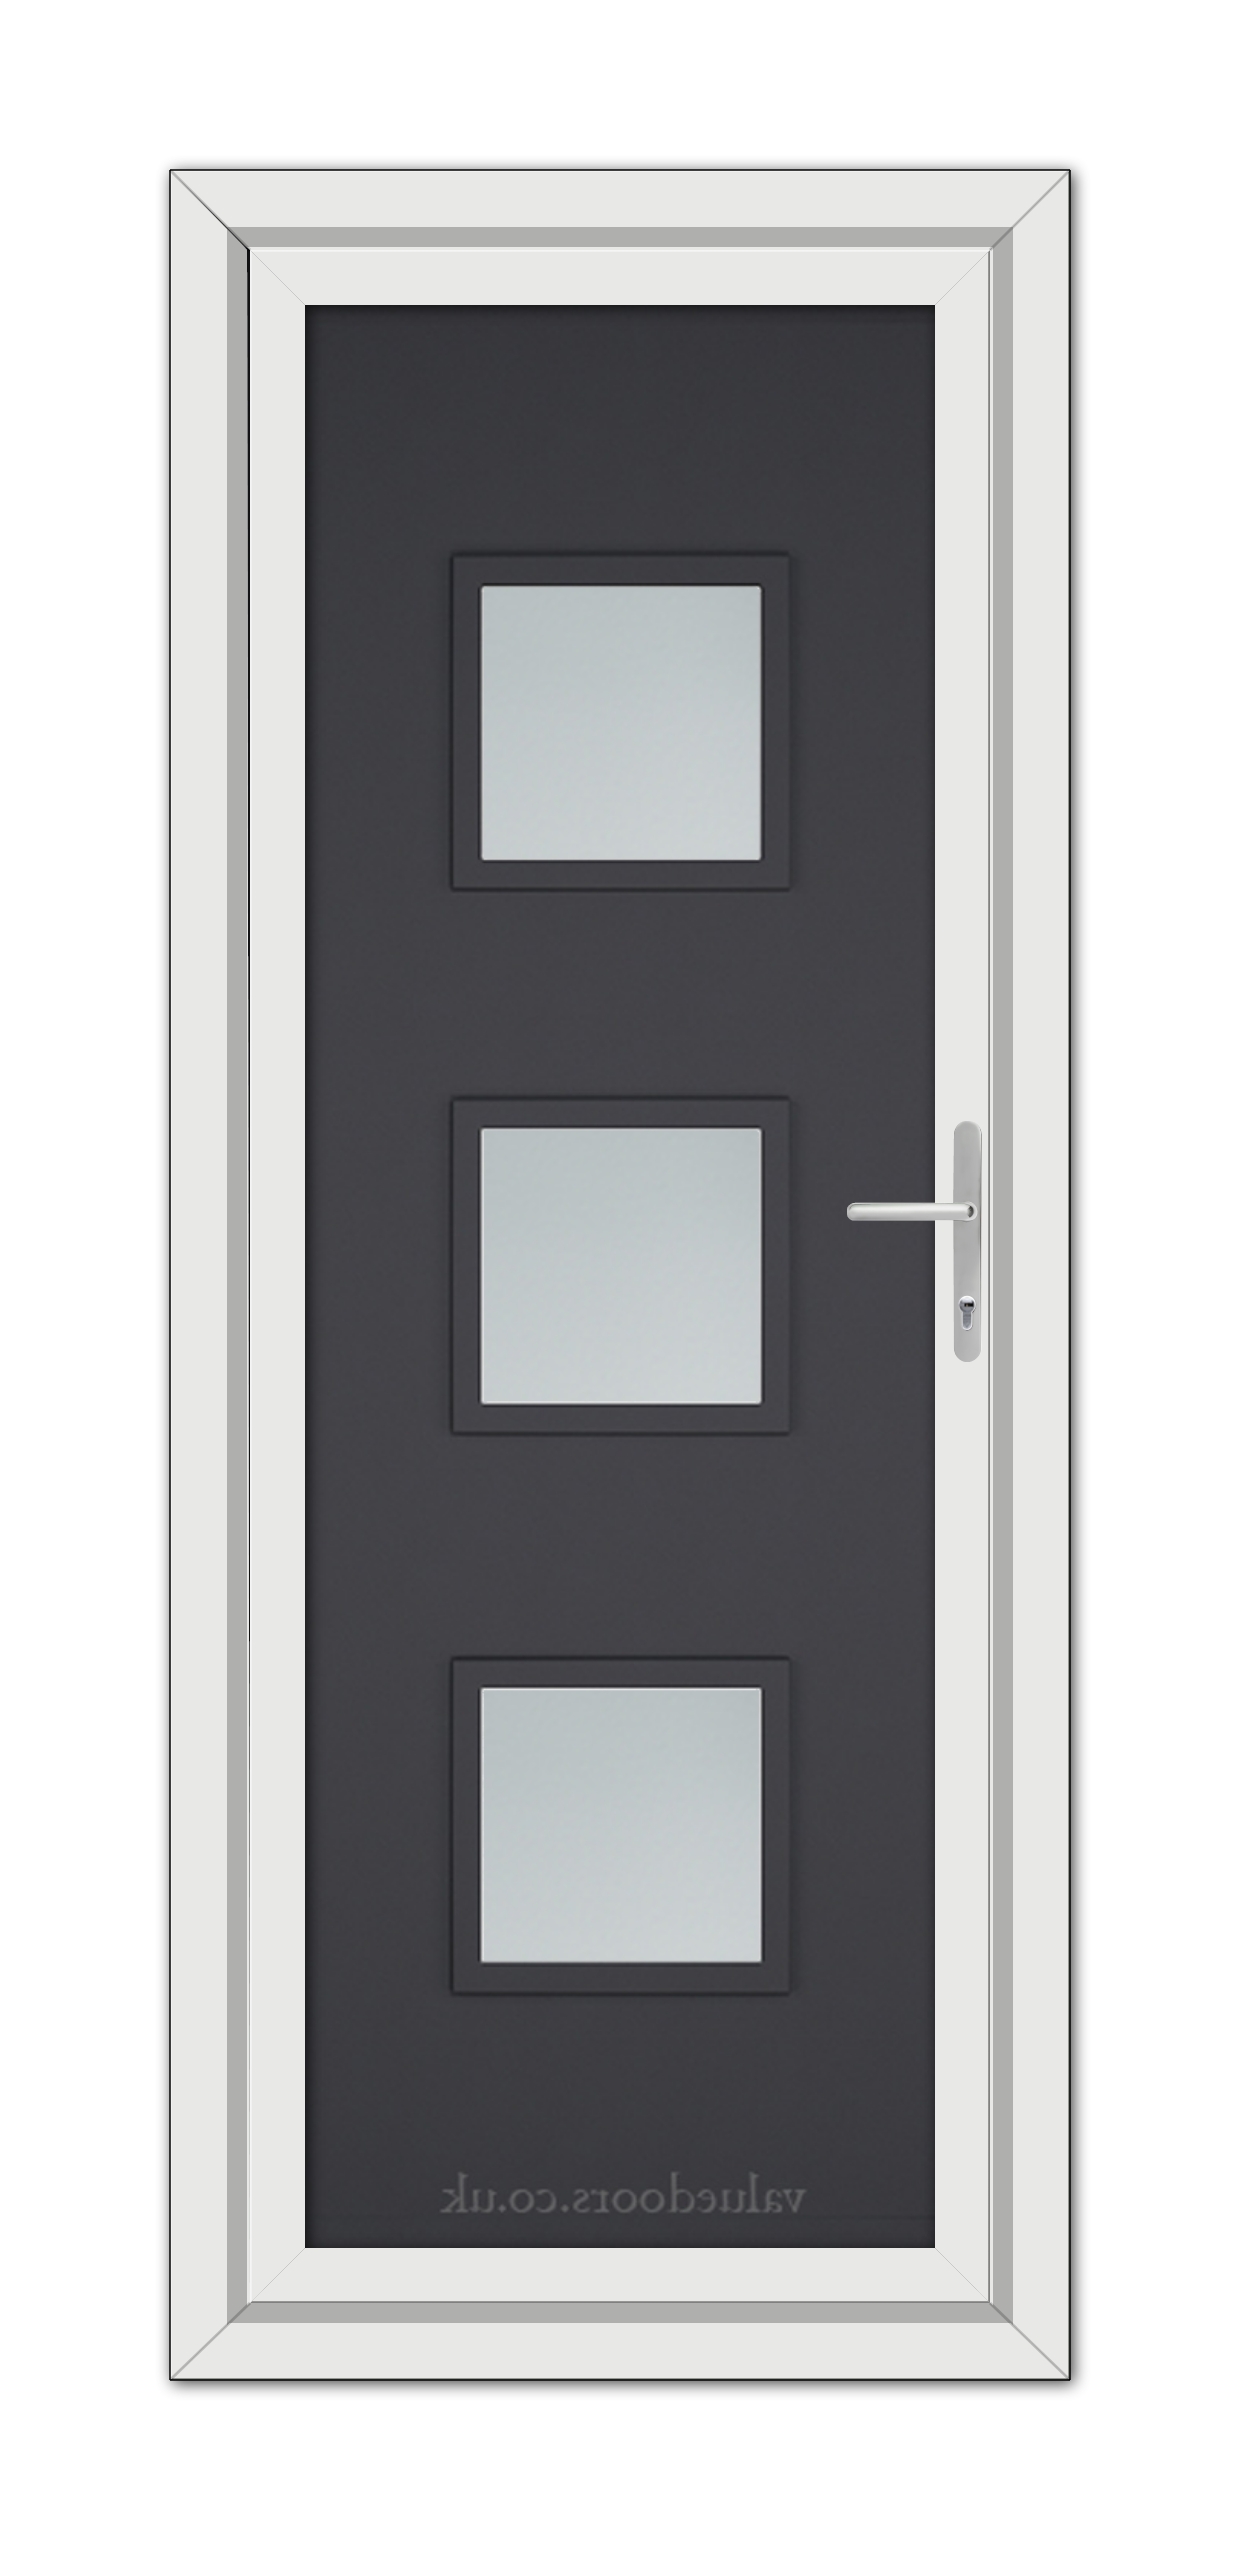 Grey Modern 5013 uPVC Door with three rectangular frosted glass panels and a silver handle, set within a white frame.